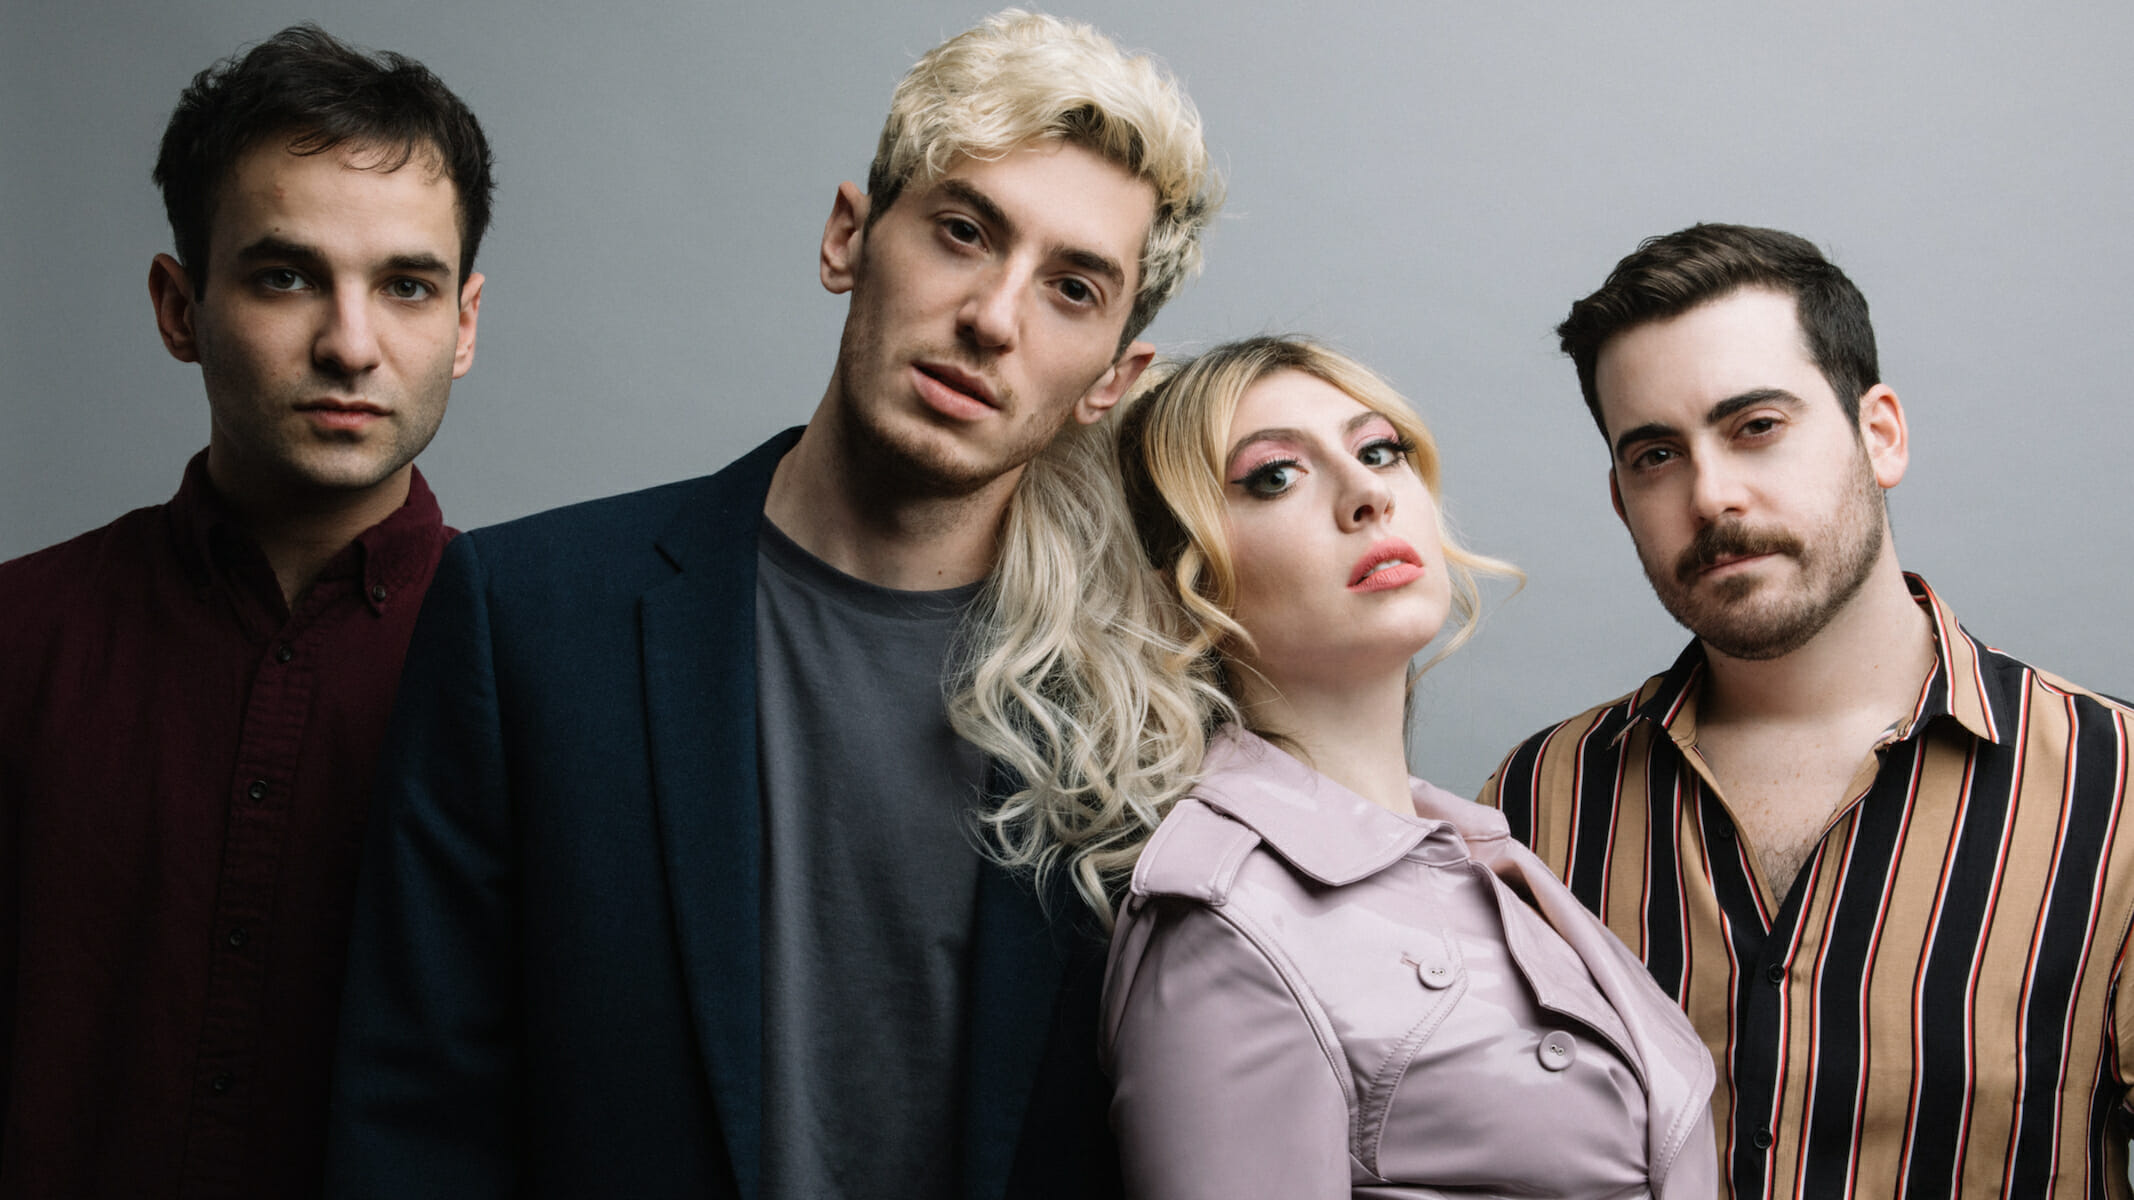 The Healing Powers of Charly Bliss’ Invigorating Pop